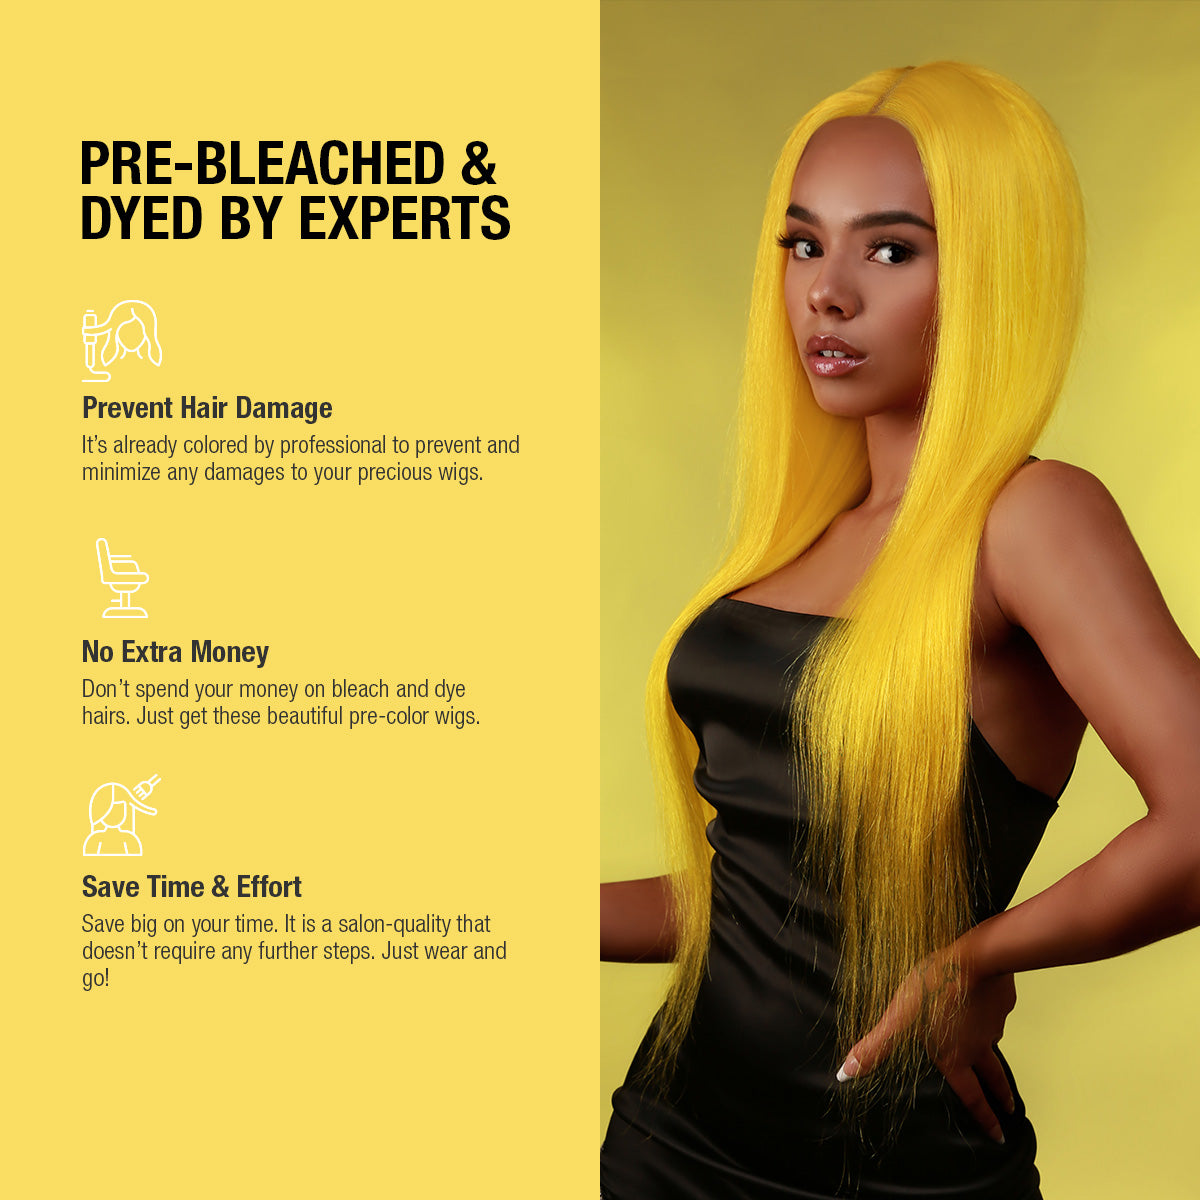 Human Hair, Lace Wig, T part, Deep part, Center Part, Middle Part, Long and Full, Natural Hairline, Straight, layered straight, HD Lace, Blonde, 613, Fancy Color, Yellow, Pre dyed, Pre bleached by experts, Prevent Hair damage, It's already colored by professional to prevent and minimize any damages to your precious wigs, No extra money, Don't spend your money on bleach and dye hairs, Just get these beautiful pre-color wigs, Save time & effort, Save big on your time